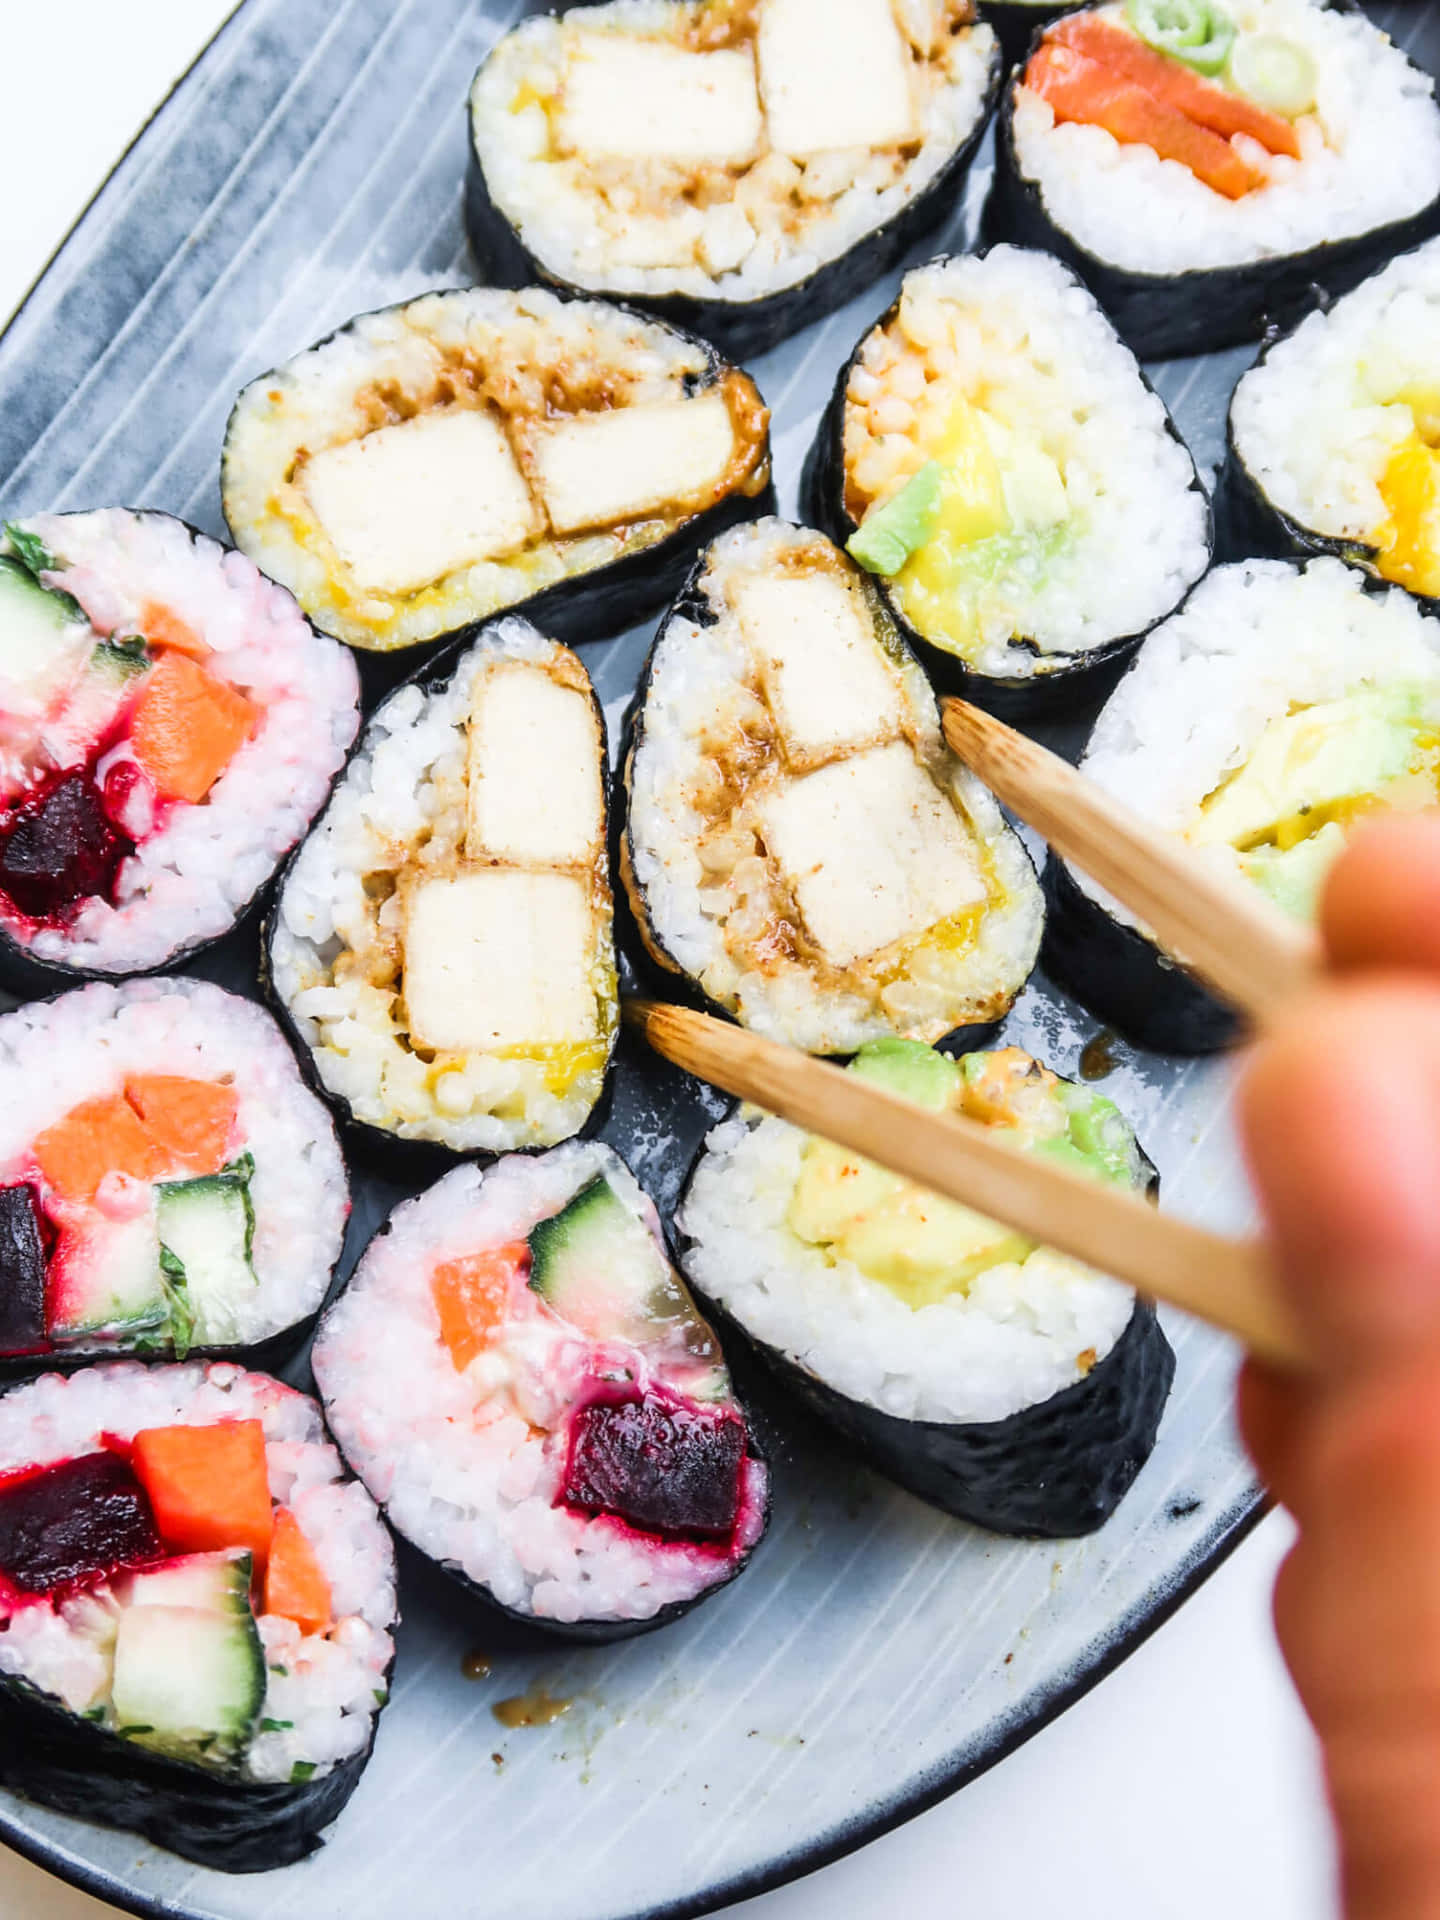 Enjoy fresh, authentic sushi for the perfect flavor burst